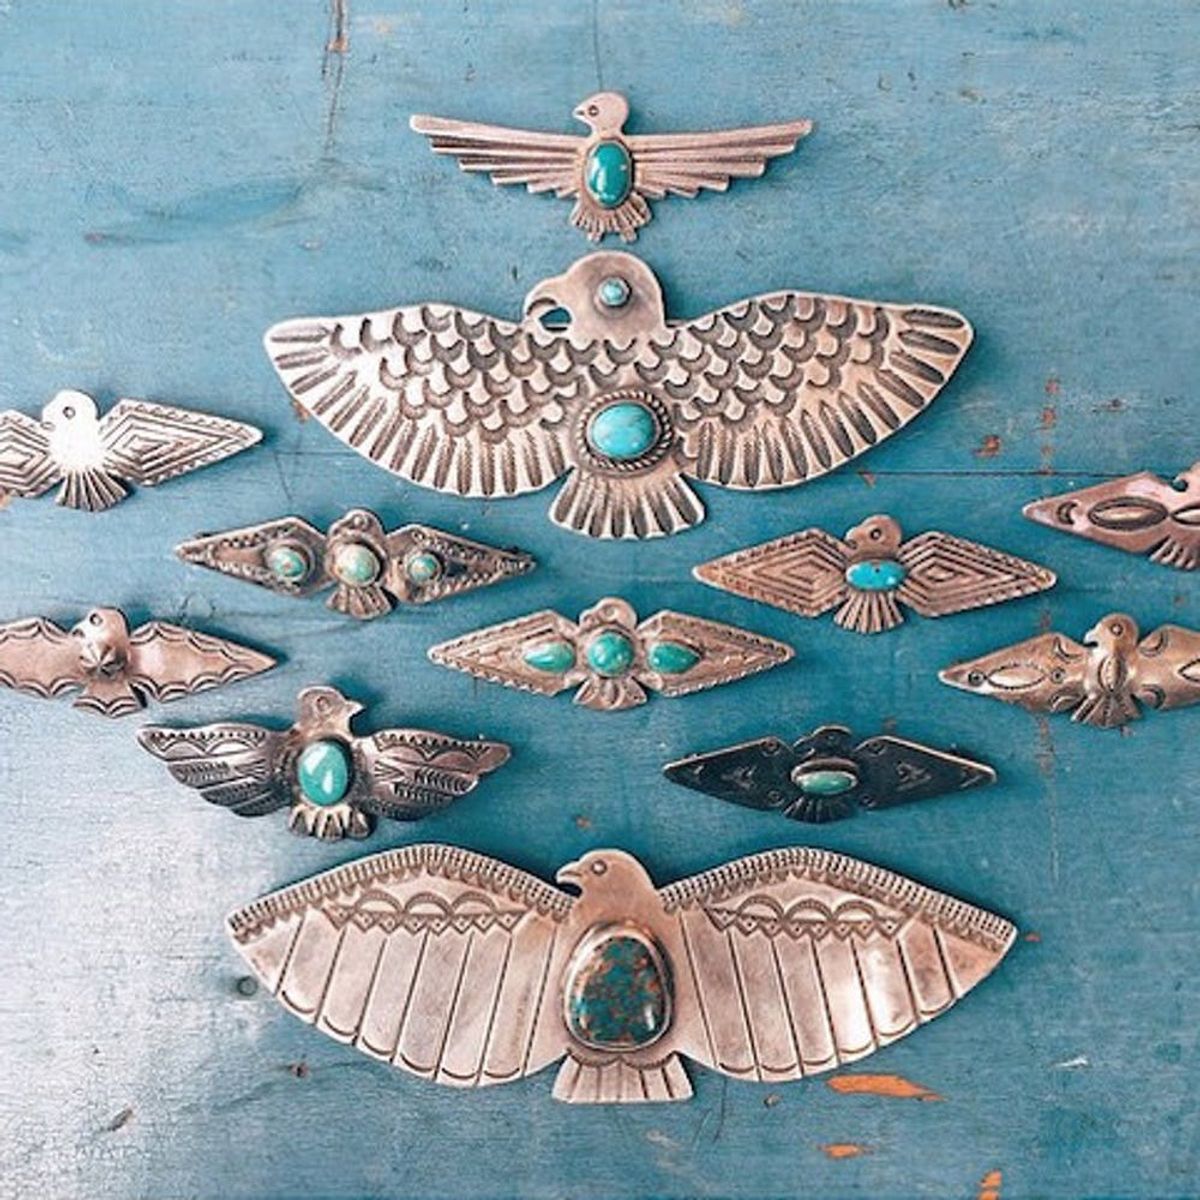 10 Antiques and Oddities Shop Instagrams You Have to See to Believe